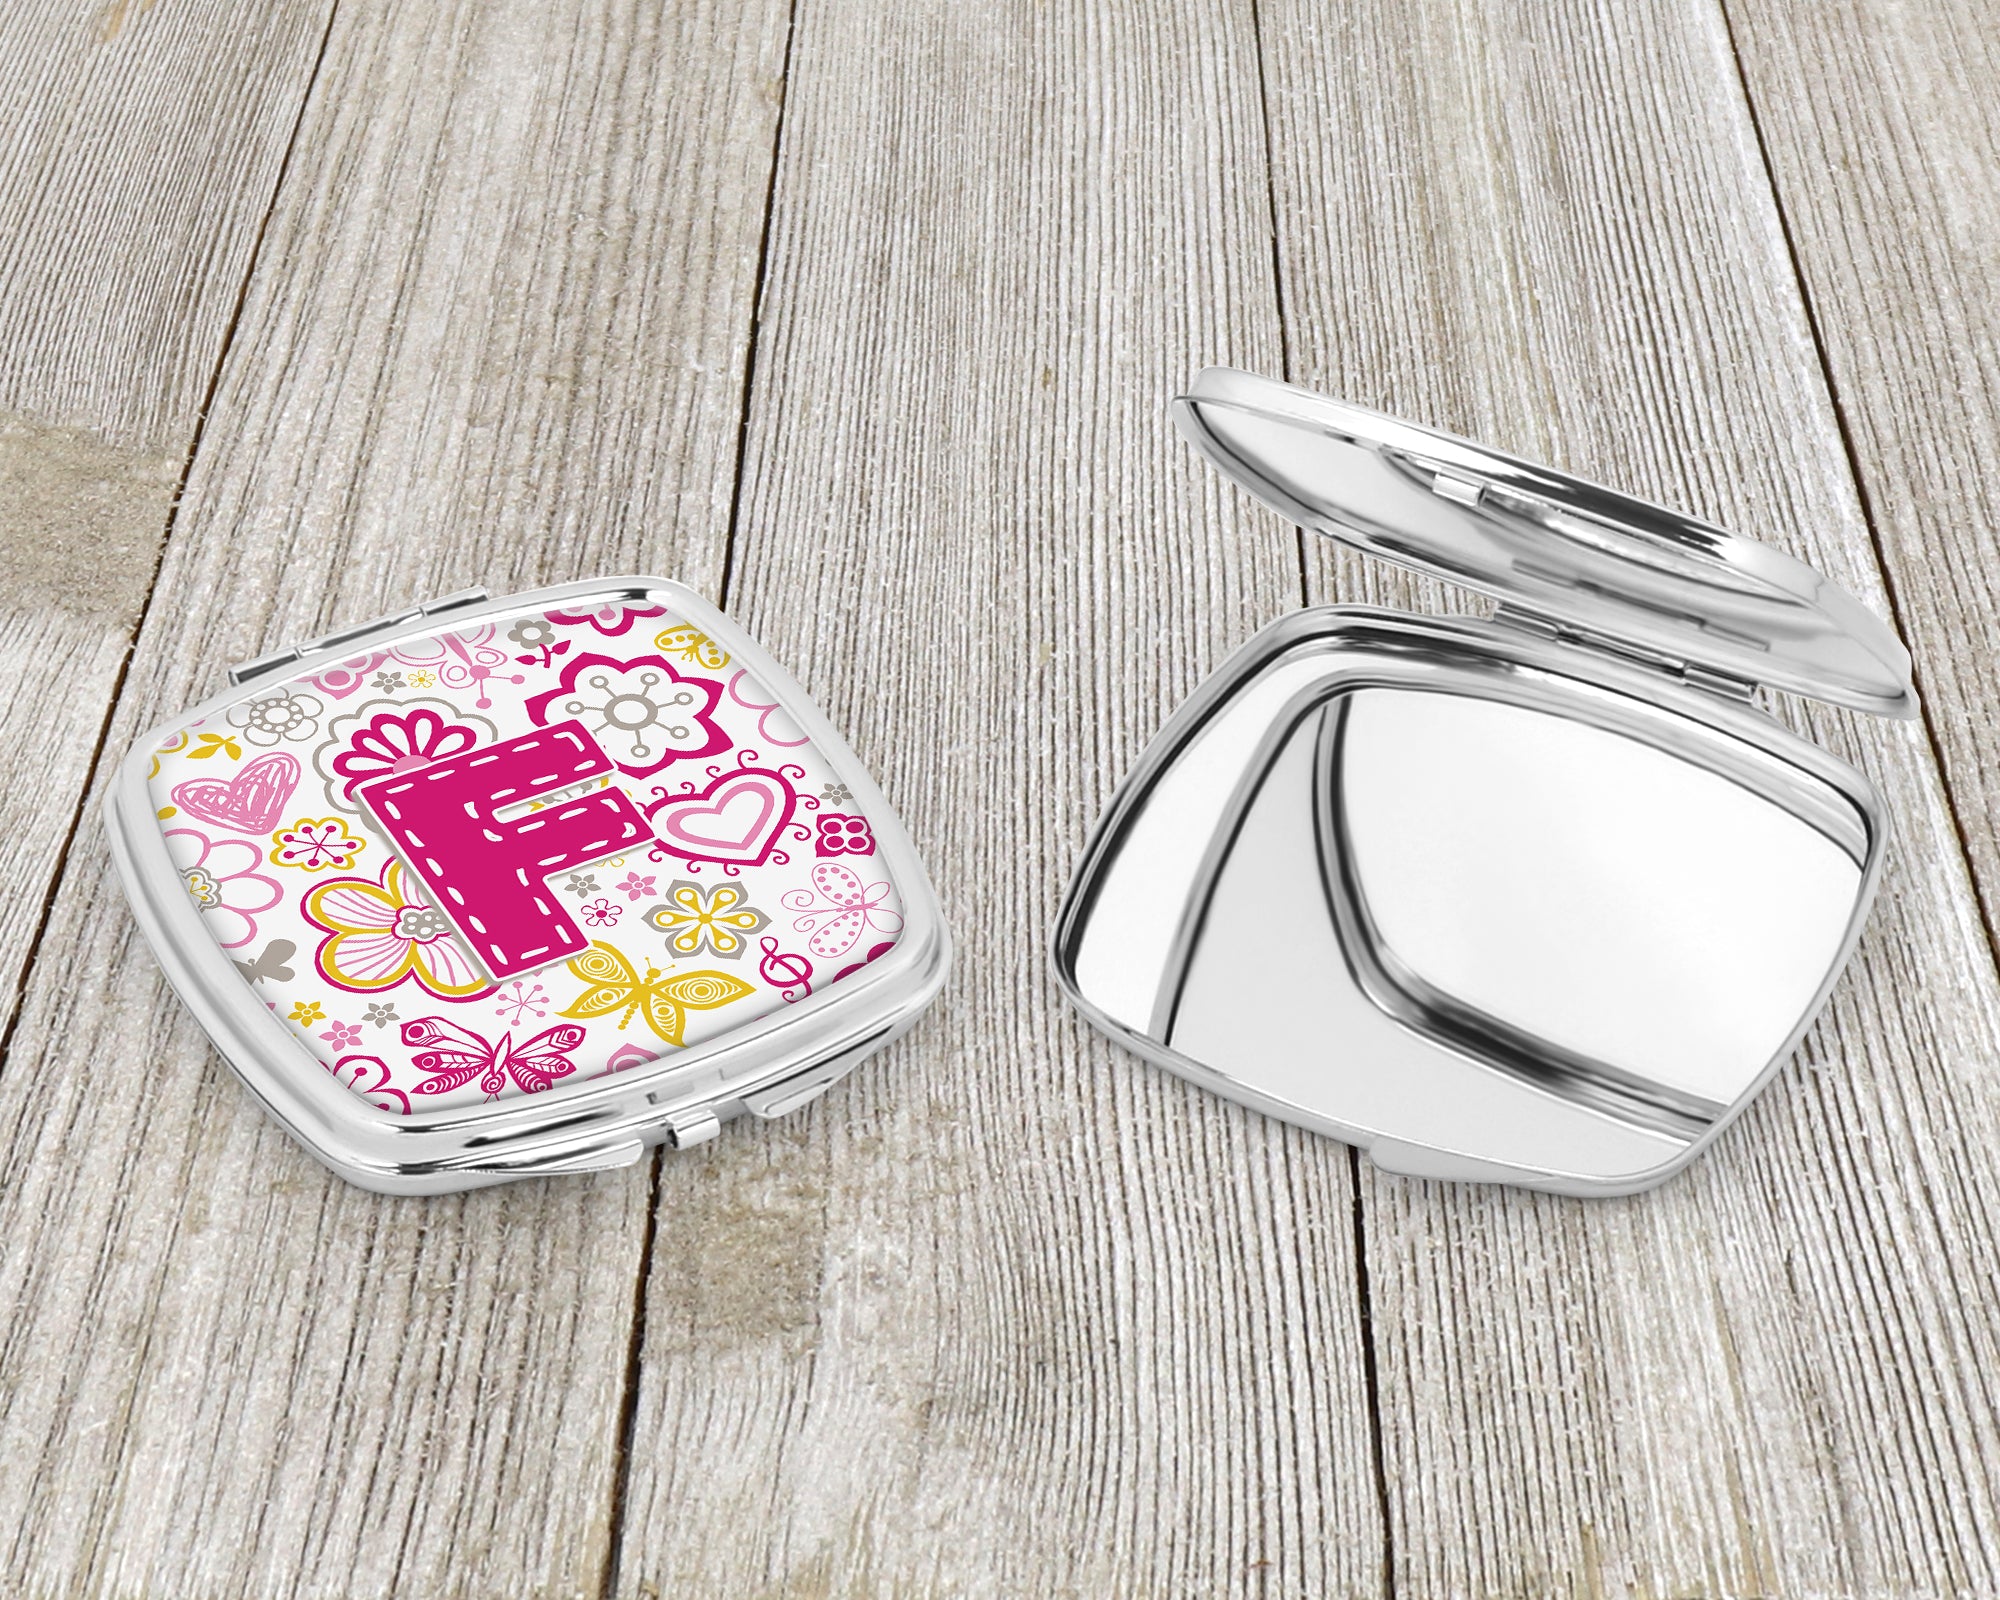 Letter F Flowers and Butterflies Pink Compact Mirror CJ2005-FSCM